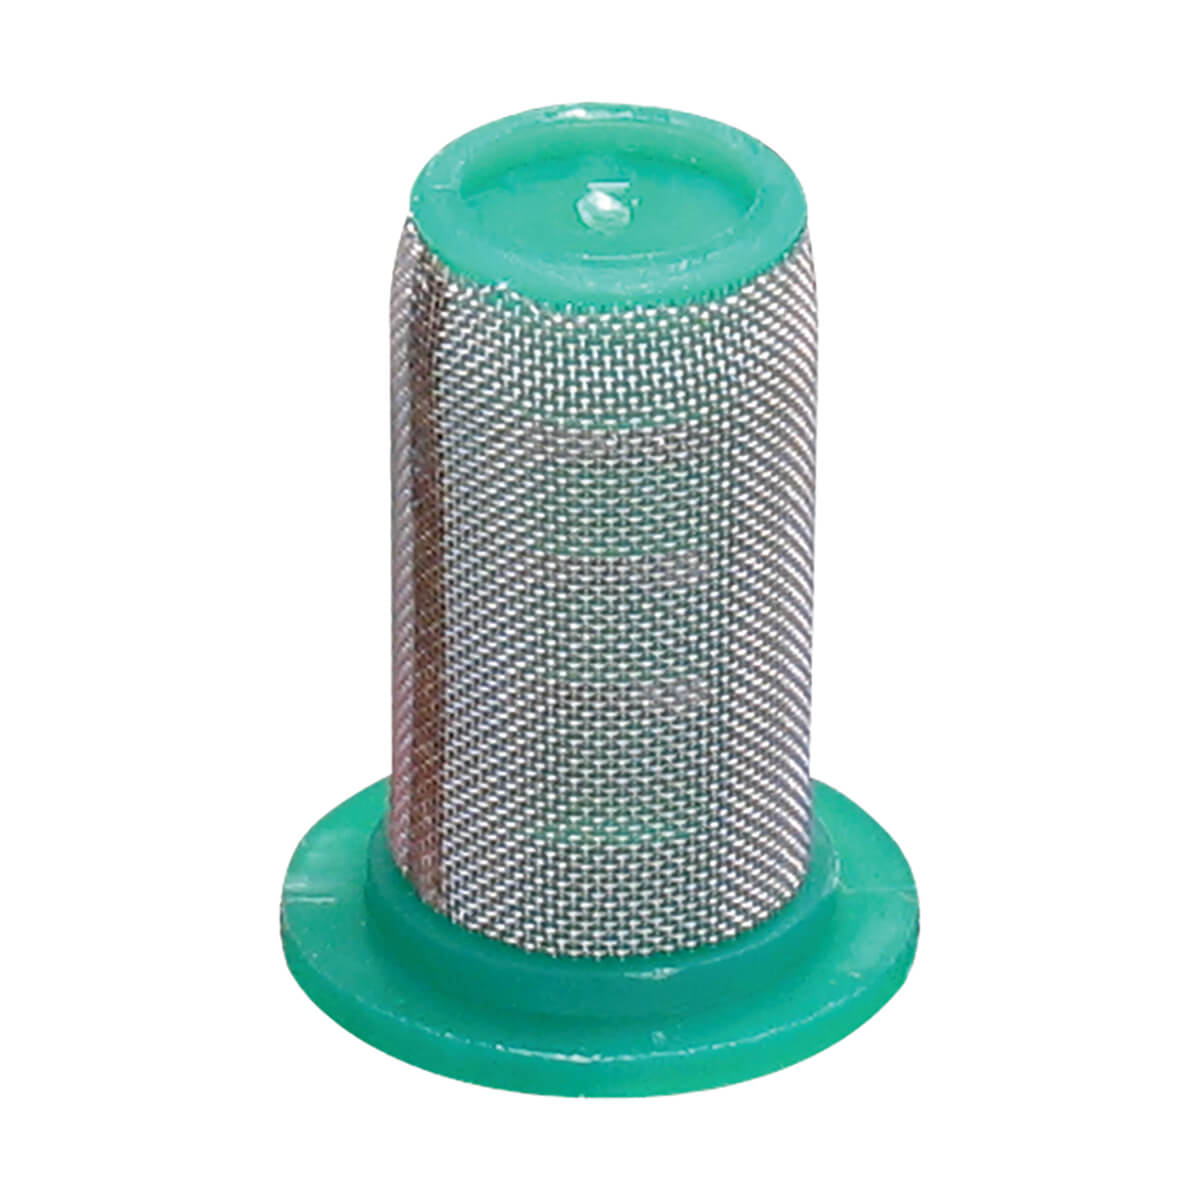 Nozzle Filter 100 Mesh Green Stainless Steel Teejet - 4 Pack